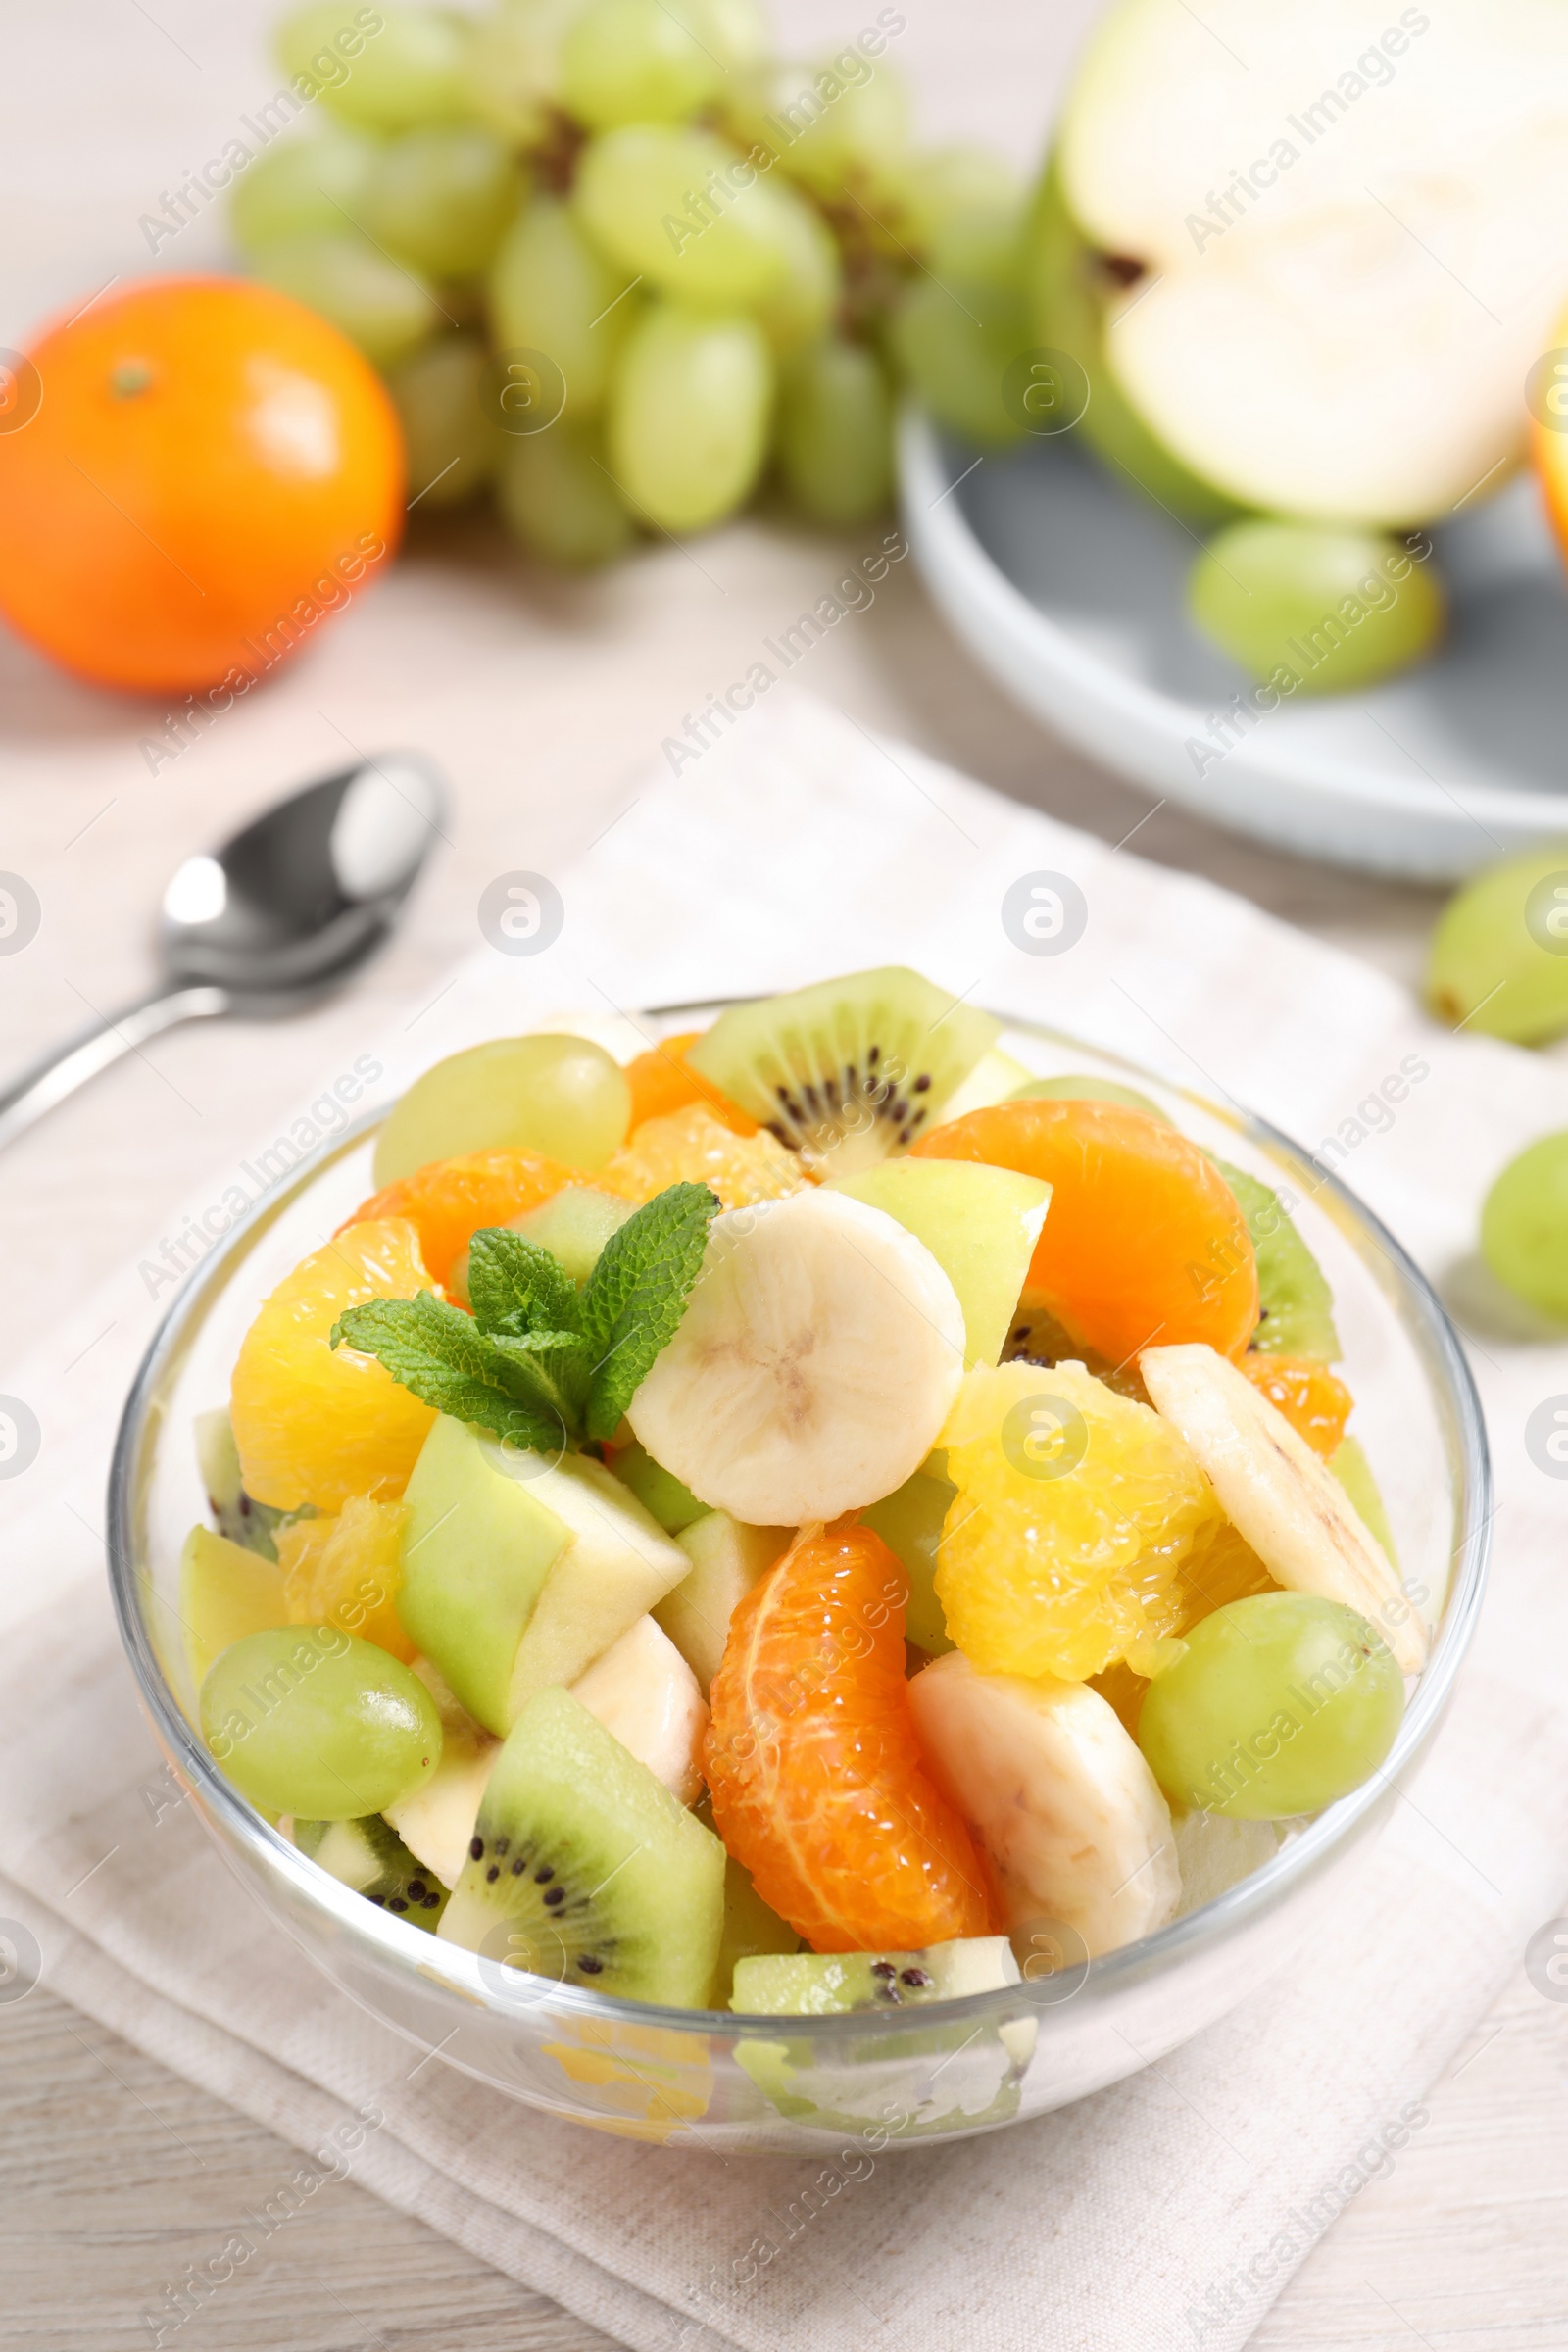 Photo of Delicious fresh fruit salad in bowl on table